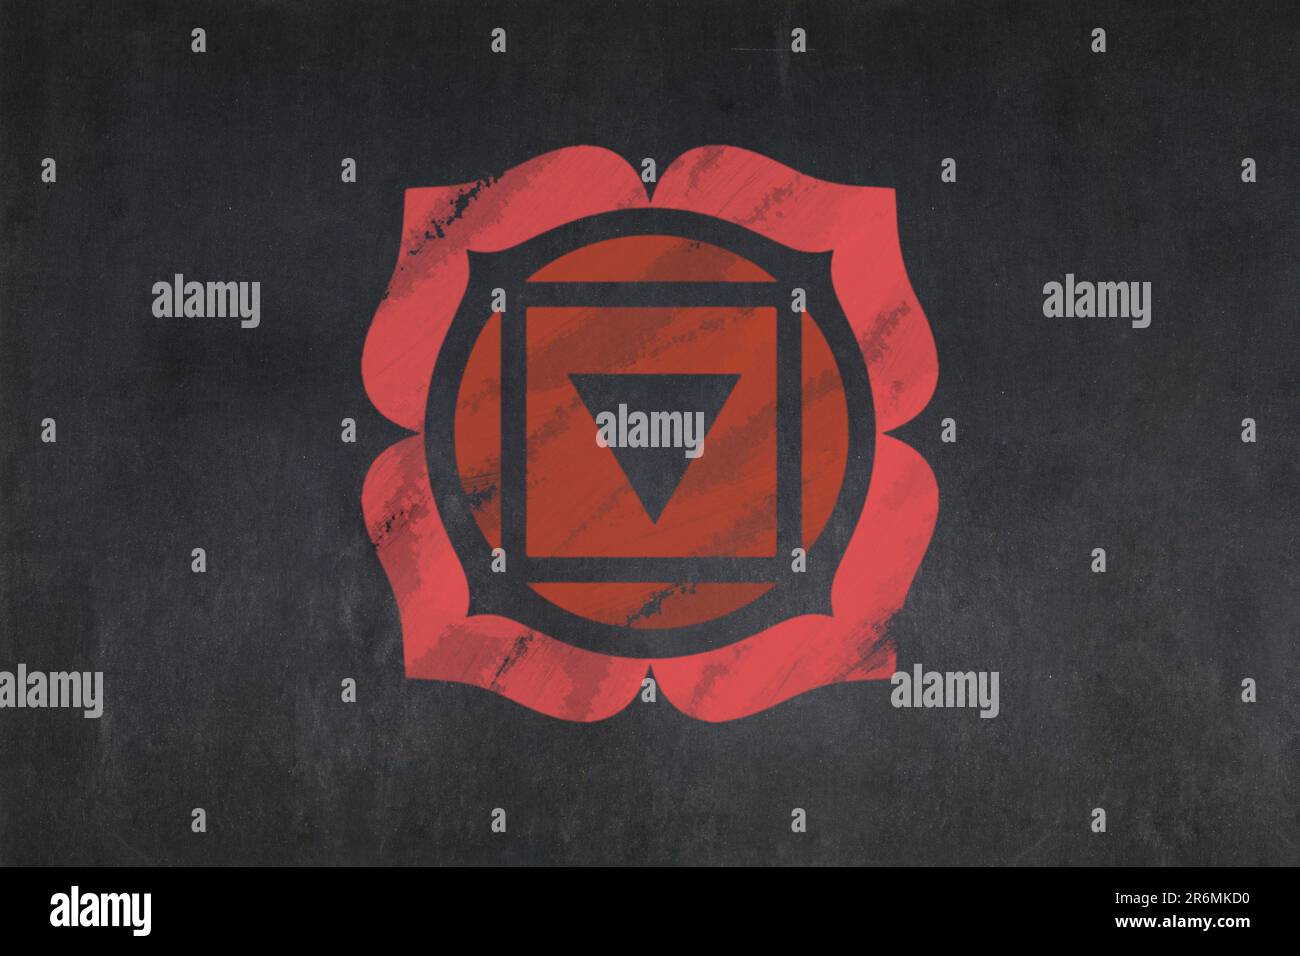 Blackboard with the symbol of the Root Chakra used in Hinduism, Buddhism and Jainism drawn in the middle. Stock Photo